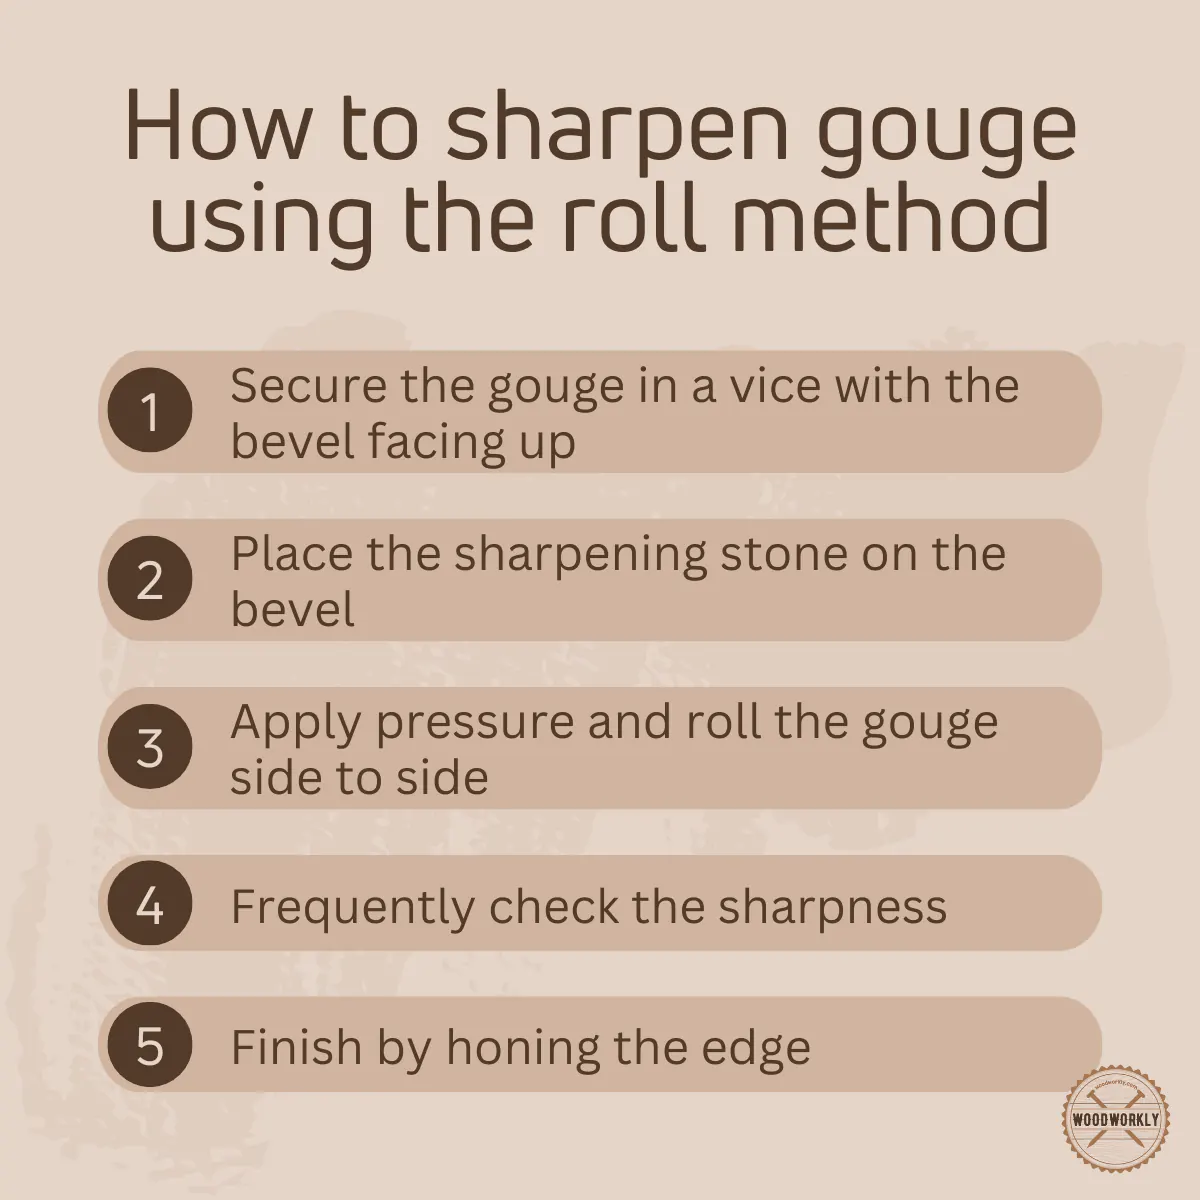 How to sharpen gouge using the roll method